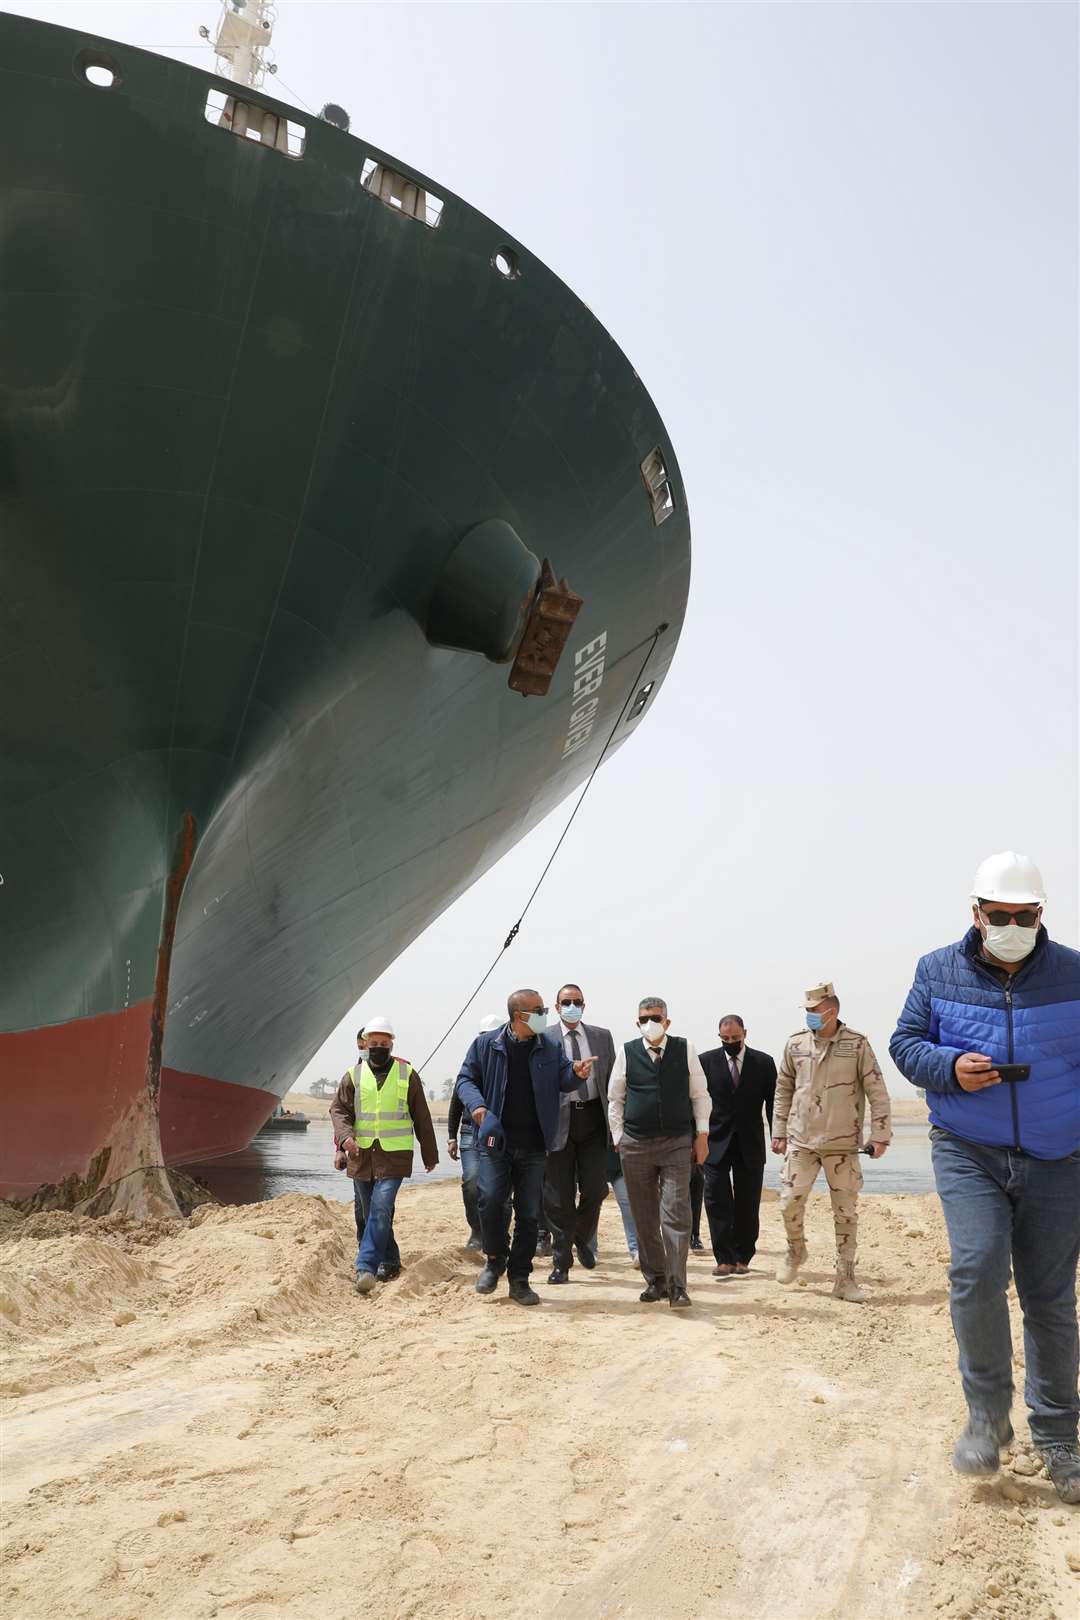 An inspection of the Ever Given after it became stuck (Suez Canal Authority)